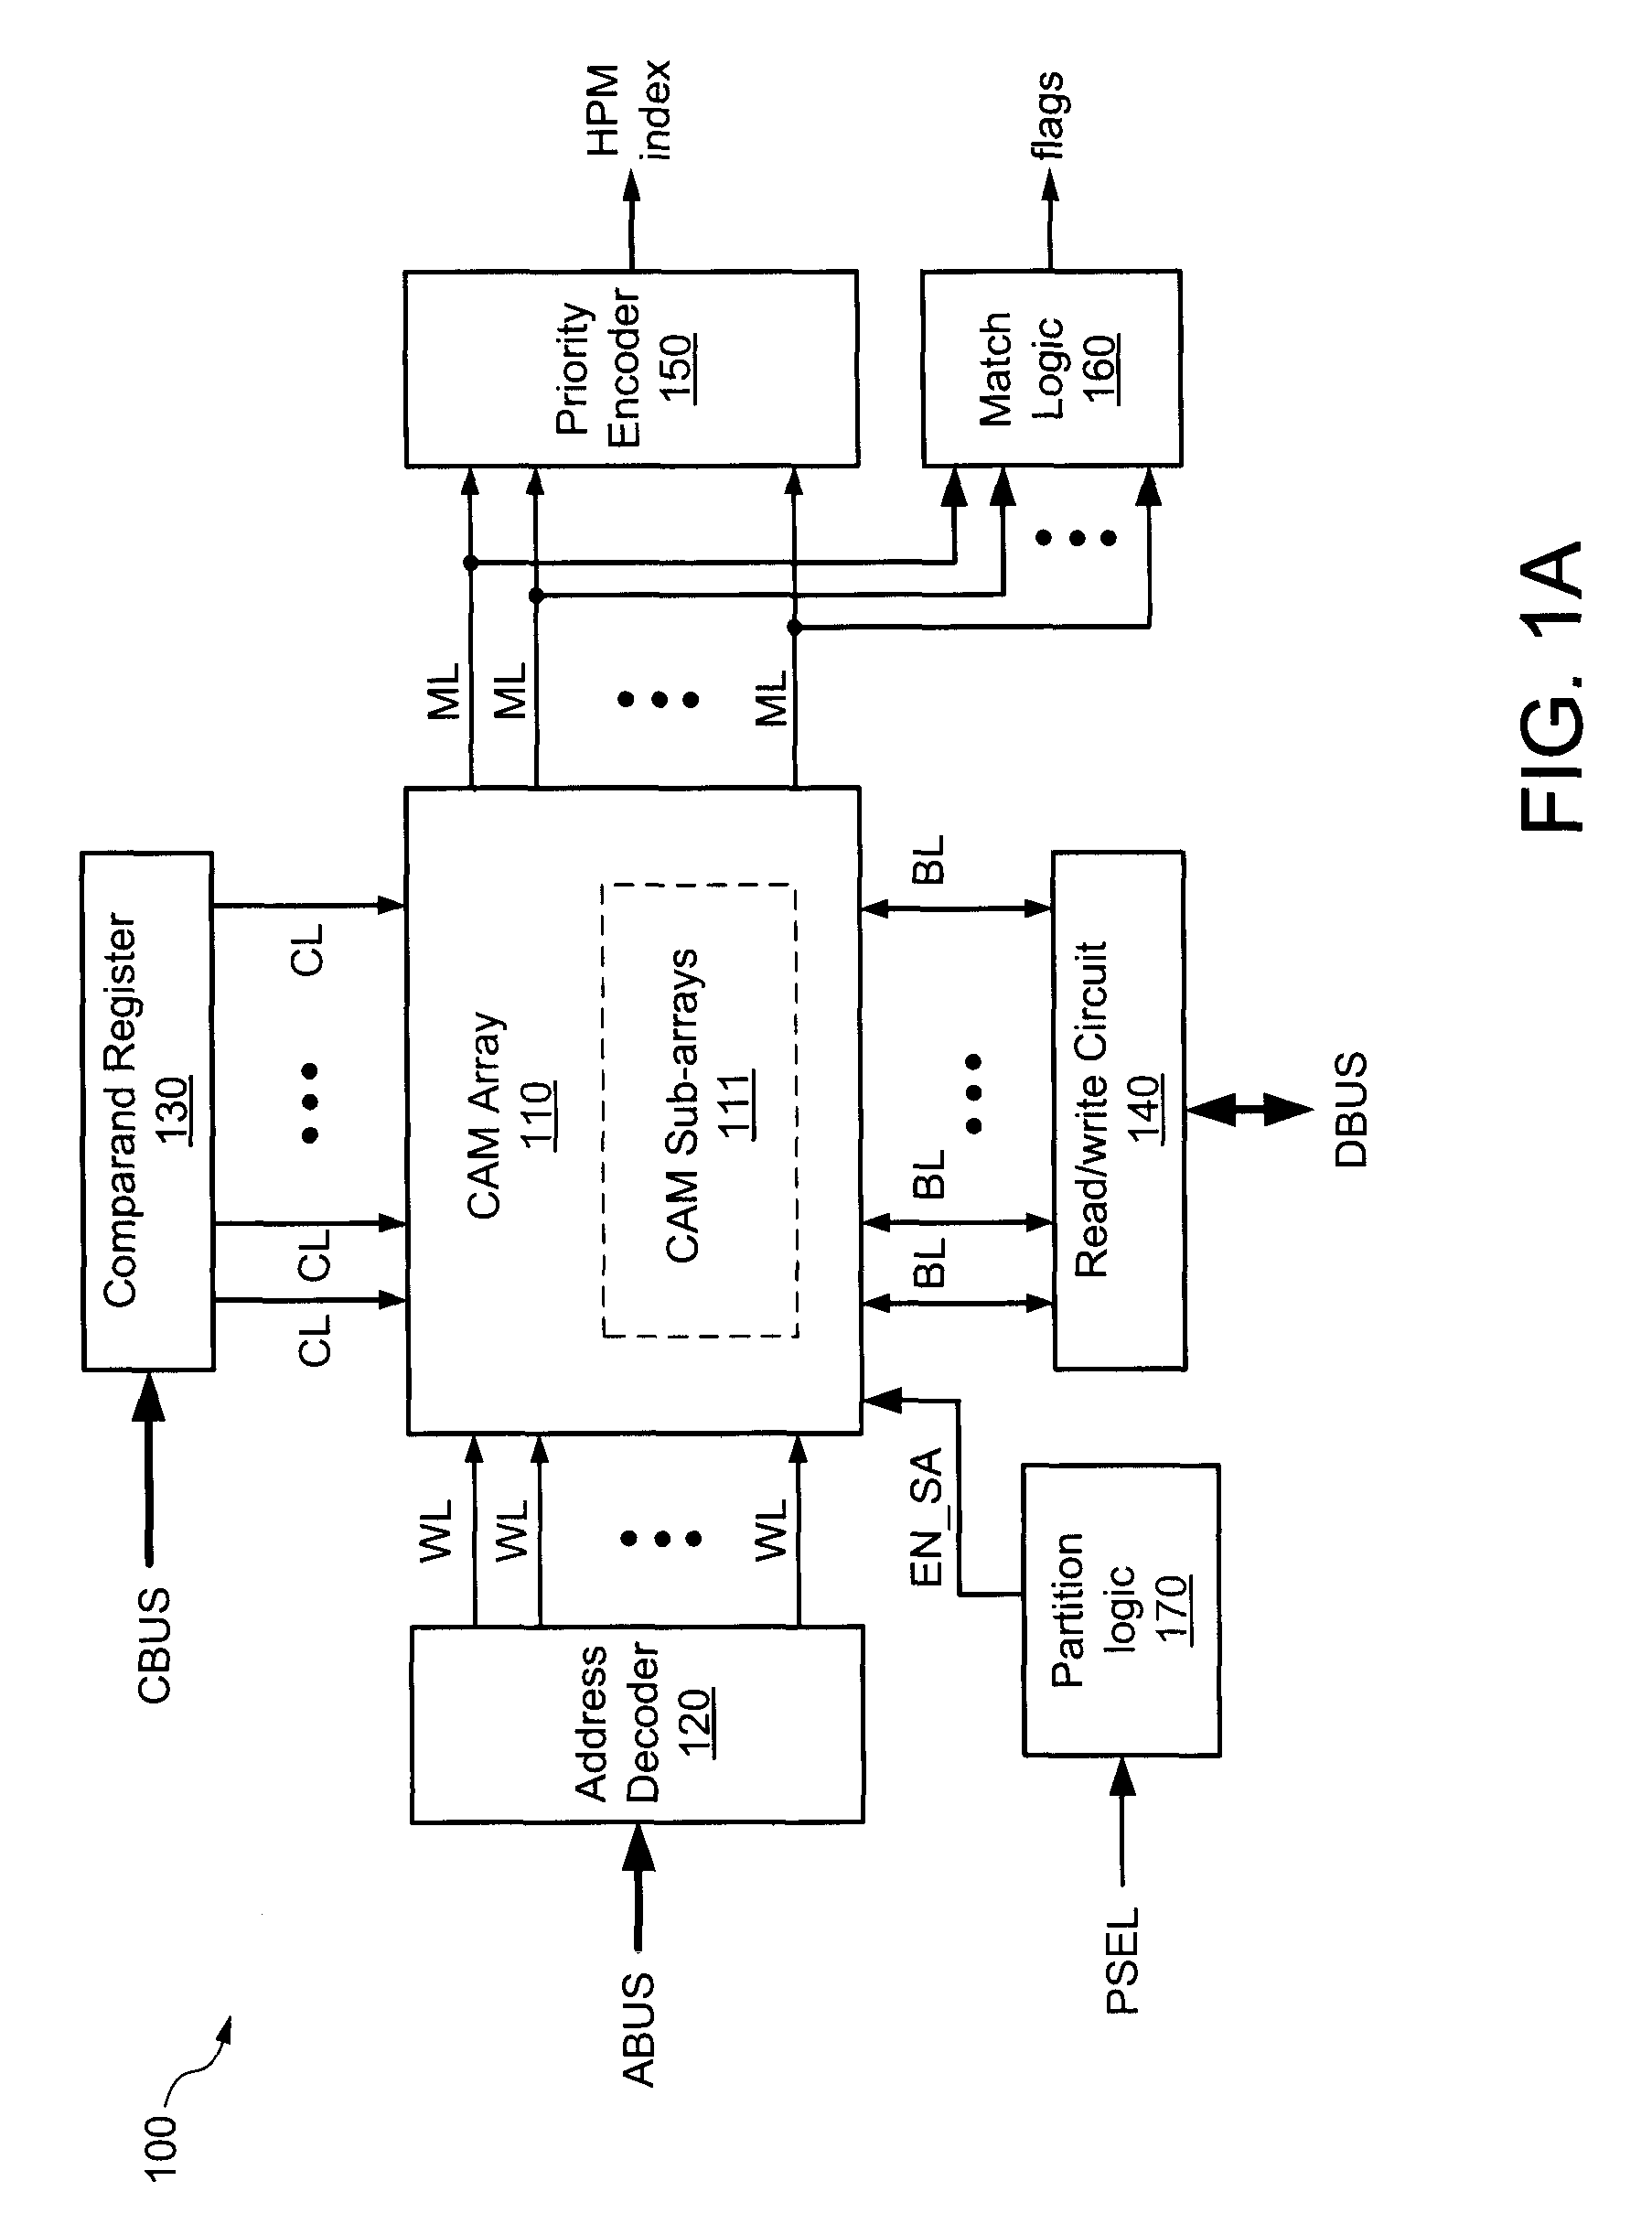 Dynamically partitioned CAM array